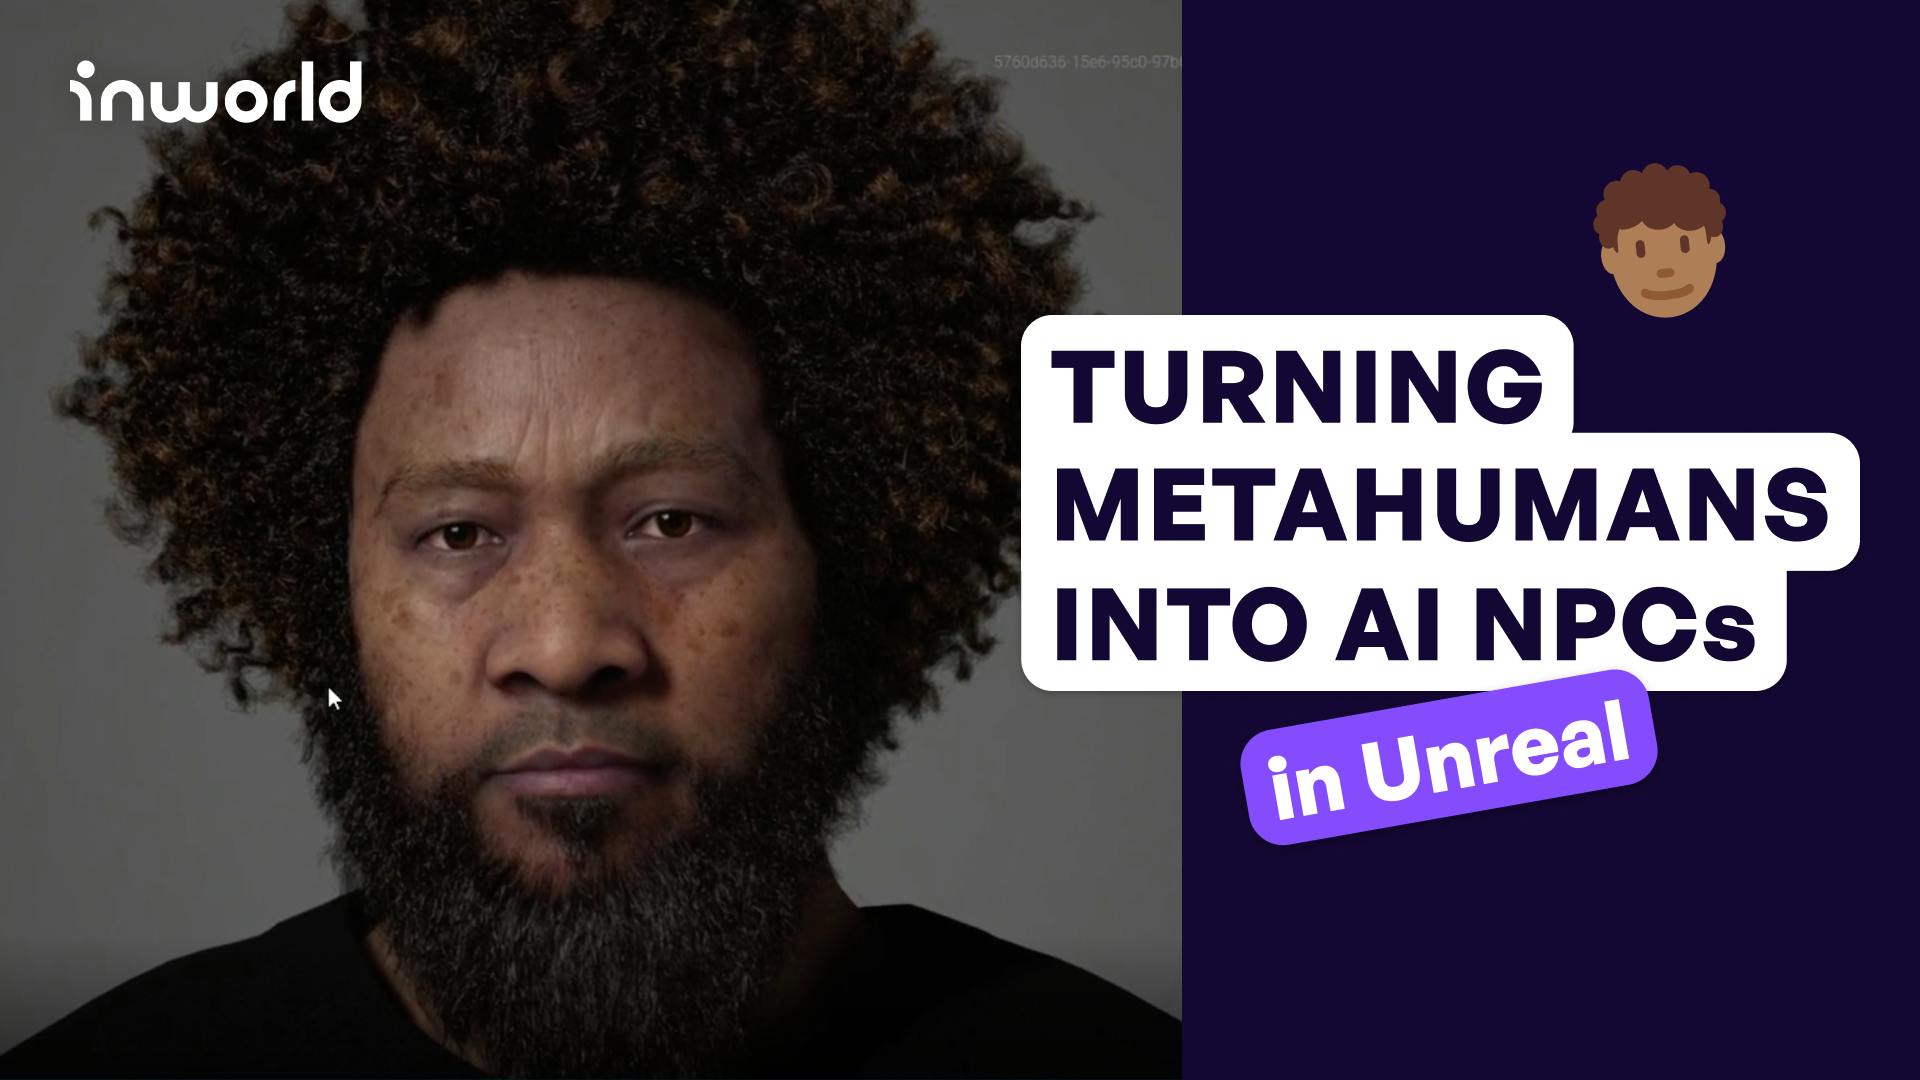 Learn how to incorporate Inworld AI into Unreal MetaHumans